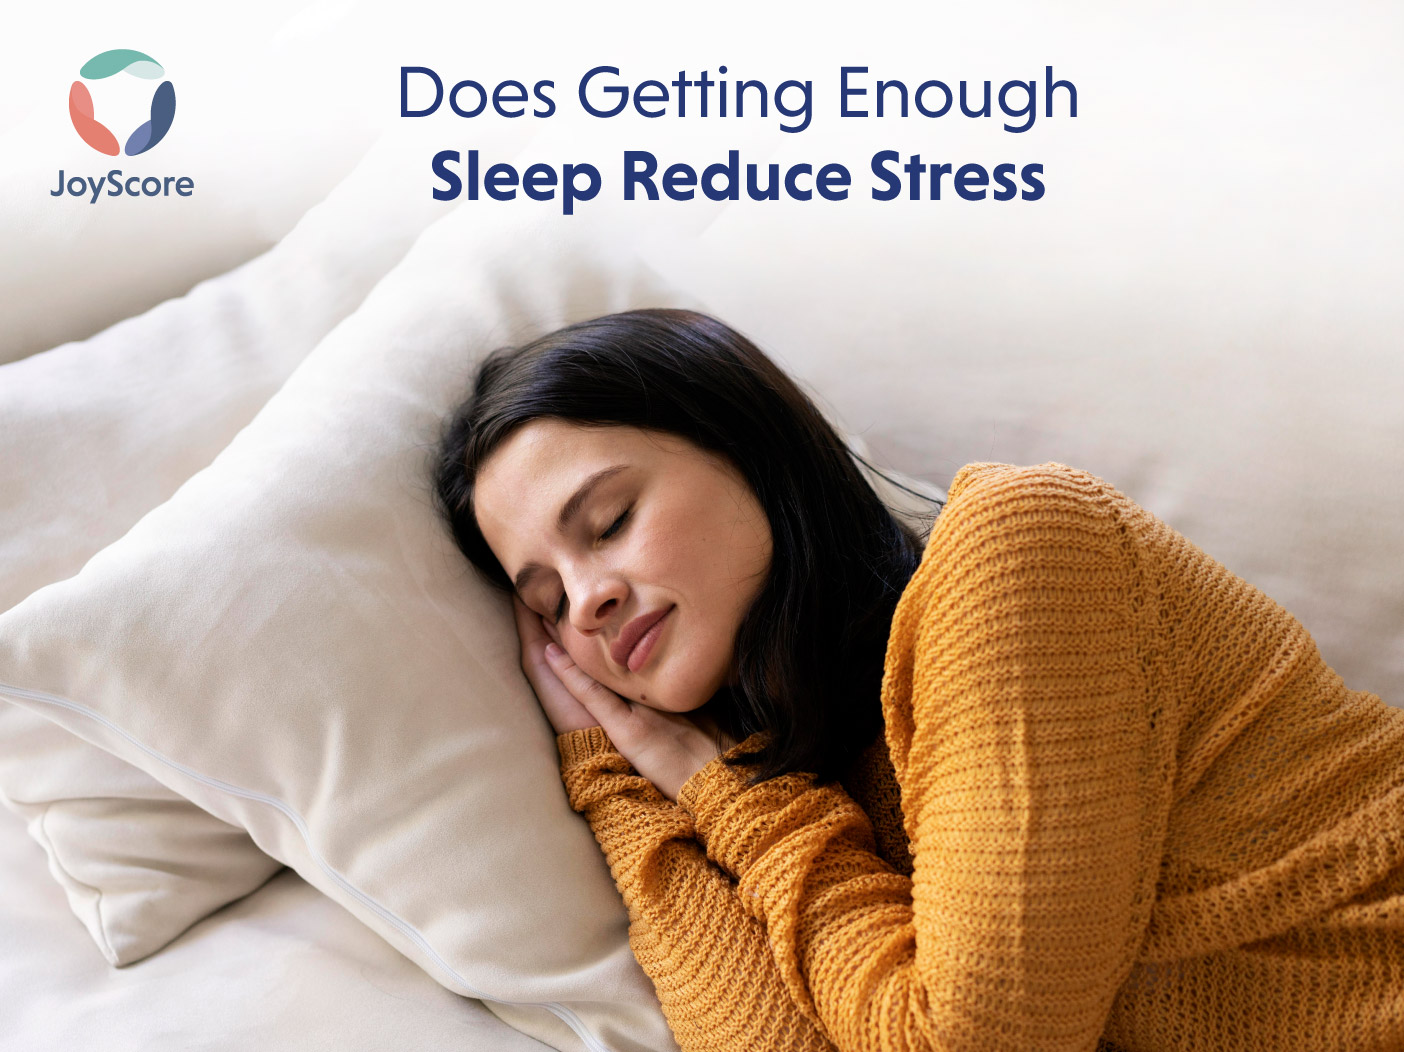 How Does Getting Enough Sleep Reduce Stress?